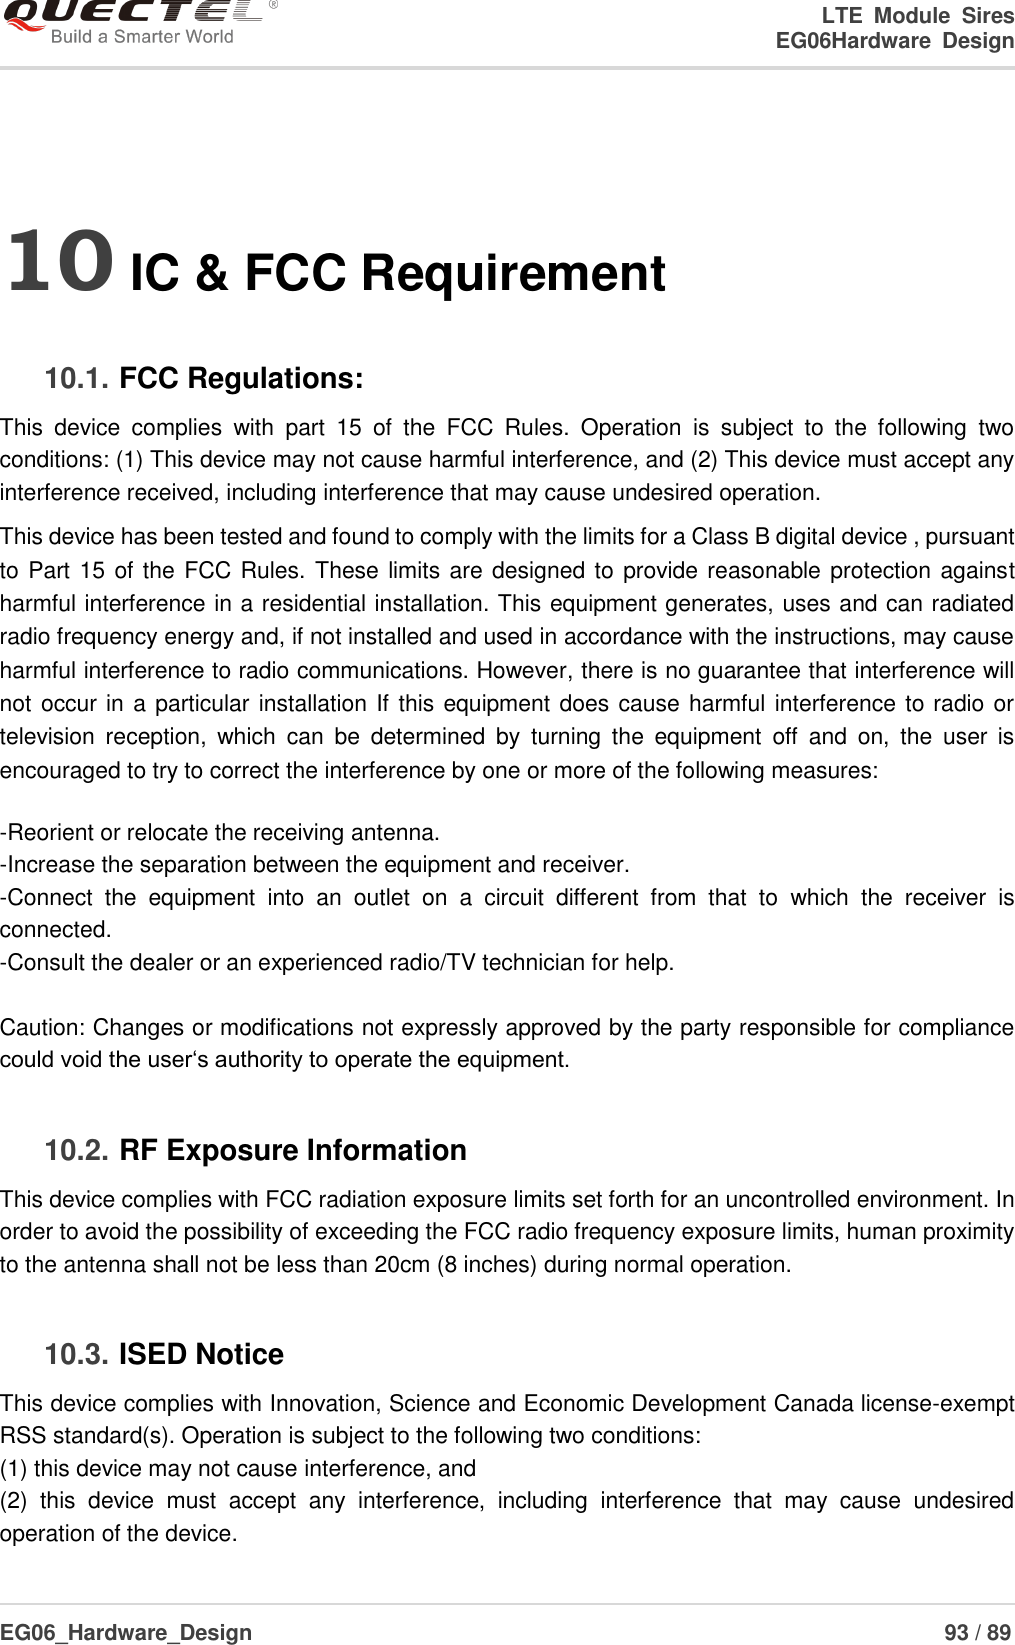 LTE  Module  Sires                                                                 EG06Hardware  Design  EG06_Hardware_Design                                                               93 / 89    10 IC &amp; FCC Requirement 10.1. FCC Regulations: This  device  complies  with  part  15  of  the  FCC  Rules.  Operation  is  subject  to  the  following  two conditions: (1) This device may not cause harmful interference, and (2) This device must accept any interference received, including interference that may cause undesired operation. This device has been tested and found to comply with the limits for a Class B digital device , pursuant to Part 15 of the FCC Rules. These limits are designed to provide reasonable protection against harmful interference in a residential installation. This equipment generates, uses and can radiated radio frequency energy and, if not installed and used in accordance with the instructions, may cause harmful interference to radio communications. However, there is no guarantee that interference will not occur in a particular installation If this equipment does cause harmful interference  to radio or television  reception,  which  can  be  determined  by  turning  the  equipment  off  and  on,  the  user  is encouraged to try to correct the interference by one or more of the following measures:  -Reorient or relocate the receiving antenna. -Increase the separation between the equipment and receiver. -Connect  the  equipment  into  an  outlet  on  a  circuit  different  from  that  to  which  the  receiver  is connected. -Consult the dealer or an experienced radio/TV technician for help.  Caution: Changes or modifications not expressly approved by the party responsible for compliance could void the user‘s authority to operate the equipment. 10.2. RF Exposure Information This device complies with FCC radiation exposure limits set forth for an uncontrolled environment. In order to avoid the possibility of exceeding the FCC radio frequency exposure limits, human proximity to the antenna shall not be less than 20cm (8 inches) during normal operation. 10.3. ISED Notice This device complies with Innovation, Science and Economic Development Canada license-exempt RSS standard(s). Operation is subject to the following two conditions: (1) this device may not cause interference, and   (2)  this  device  must  accept  any  interference,  including  interference  that  may  cause  undesired operation of the device. 